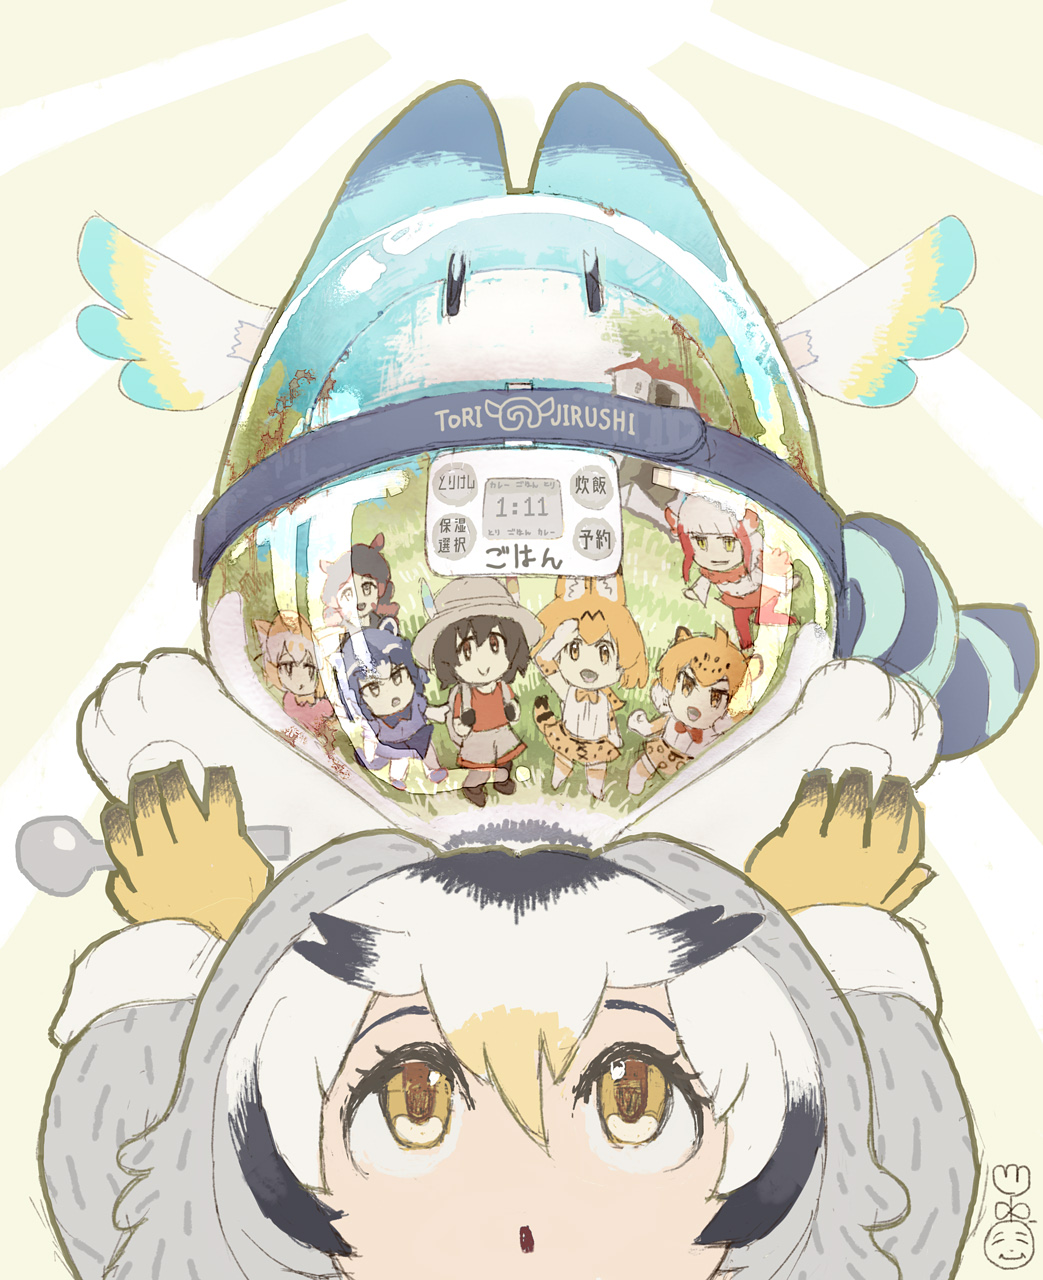 6+girls animal_ears backpack bag black_footwear black_hair blonde_hair blue_footwear blue_hair bow bowtie catcar0983 common_raccoon_(kemono_friends) fennec_(kemono_friends) gloves grey_headwear grey_shorts hair_between_eyes hand_up hat_feather head_wings highres hippopotamus_(kemono_friends) hippopotamus_ears holding jaguar_(kemono_friends) jaguar_ears jaguar_print japanese_crested_ibis_(kemono_friends) kaban_(kemono_friends) kemono_friends long_sleeves looking_at_viewer looking_up lucky_beast_(kemono_friends) multicolored_hair multiple_girls no_nose northern_white-faced_owl_(kemono_friends) open_mouth raccoon_ears red_eyes red_hair red_legwear red_neckwear red_shirt serval_(kemono_friends) serval_ears serval_print serval_tail shirt shoes short_hair short_sleeves shorts smile spoon tail two-tone_hair white_hair yellow_eyes yellow_gloves